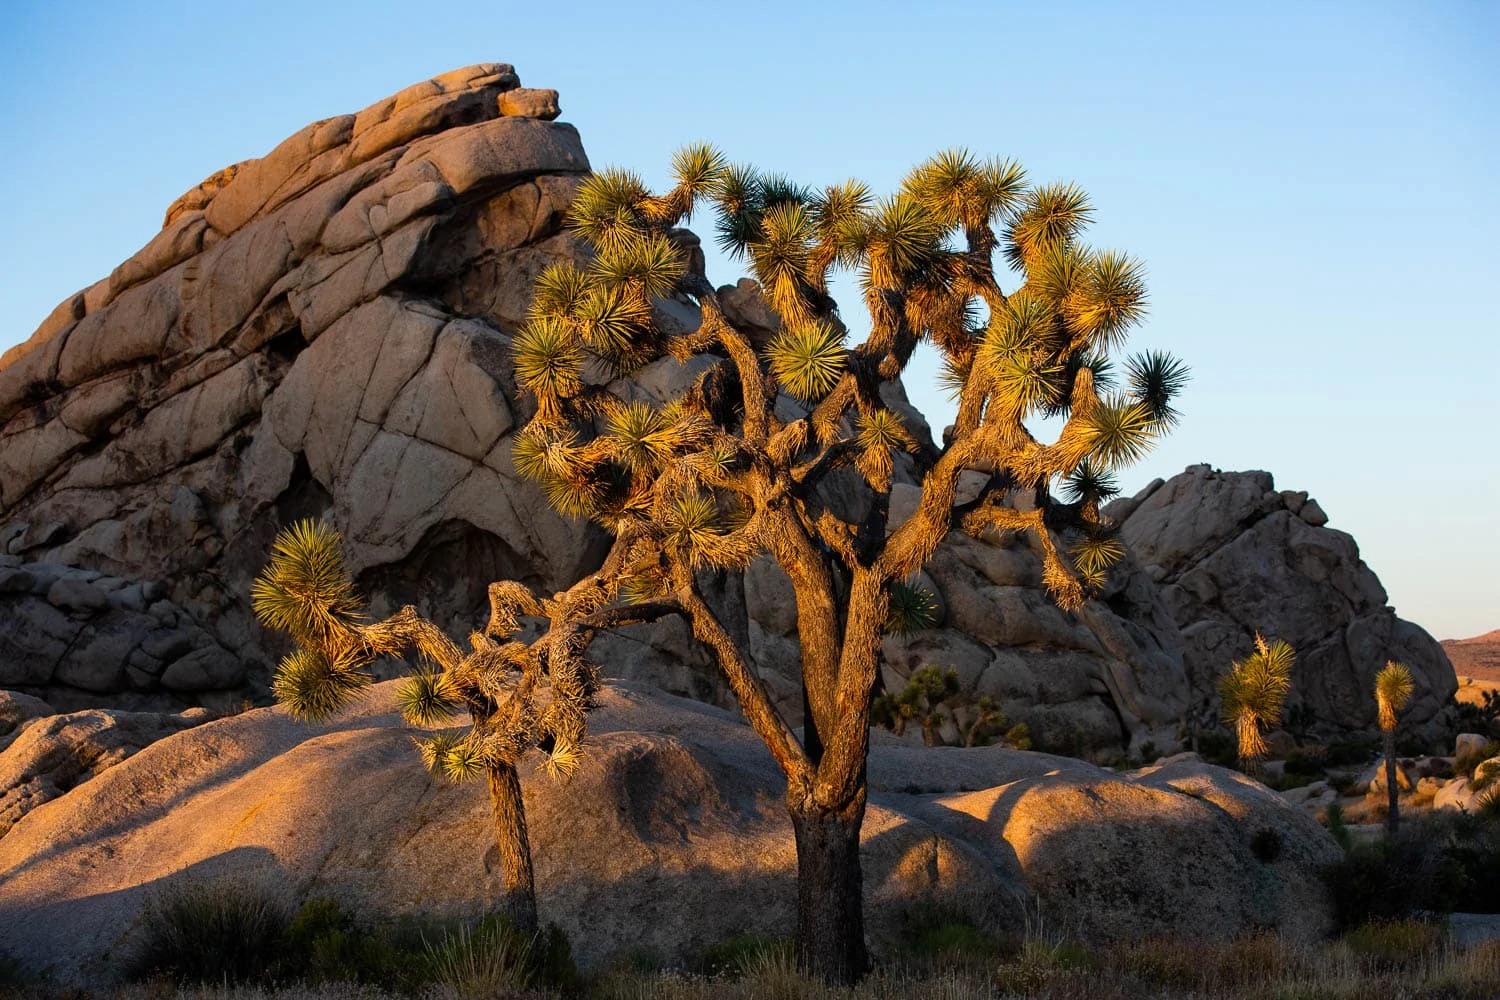 Gold sunset light hits a rock formation and joshua trees at Quail Spring in Joshua Tree National Park.